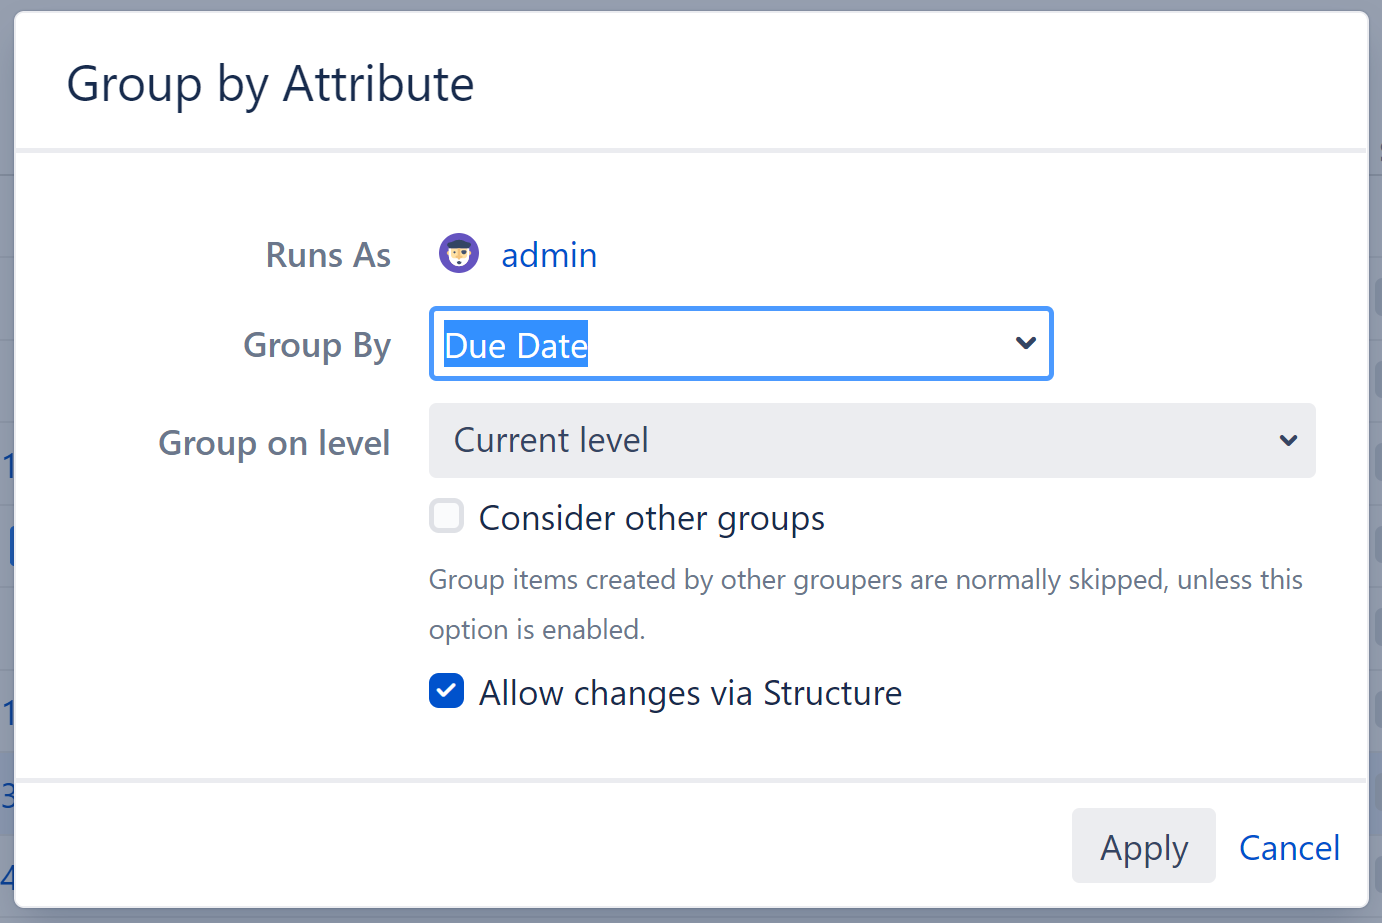 group by attribute settings